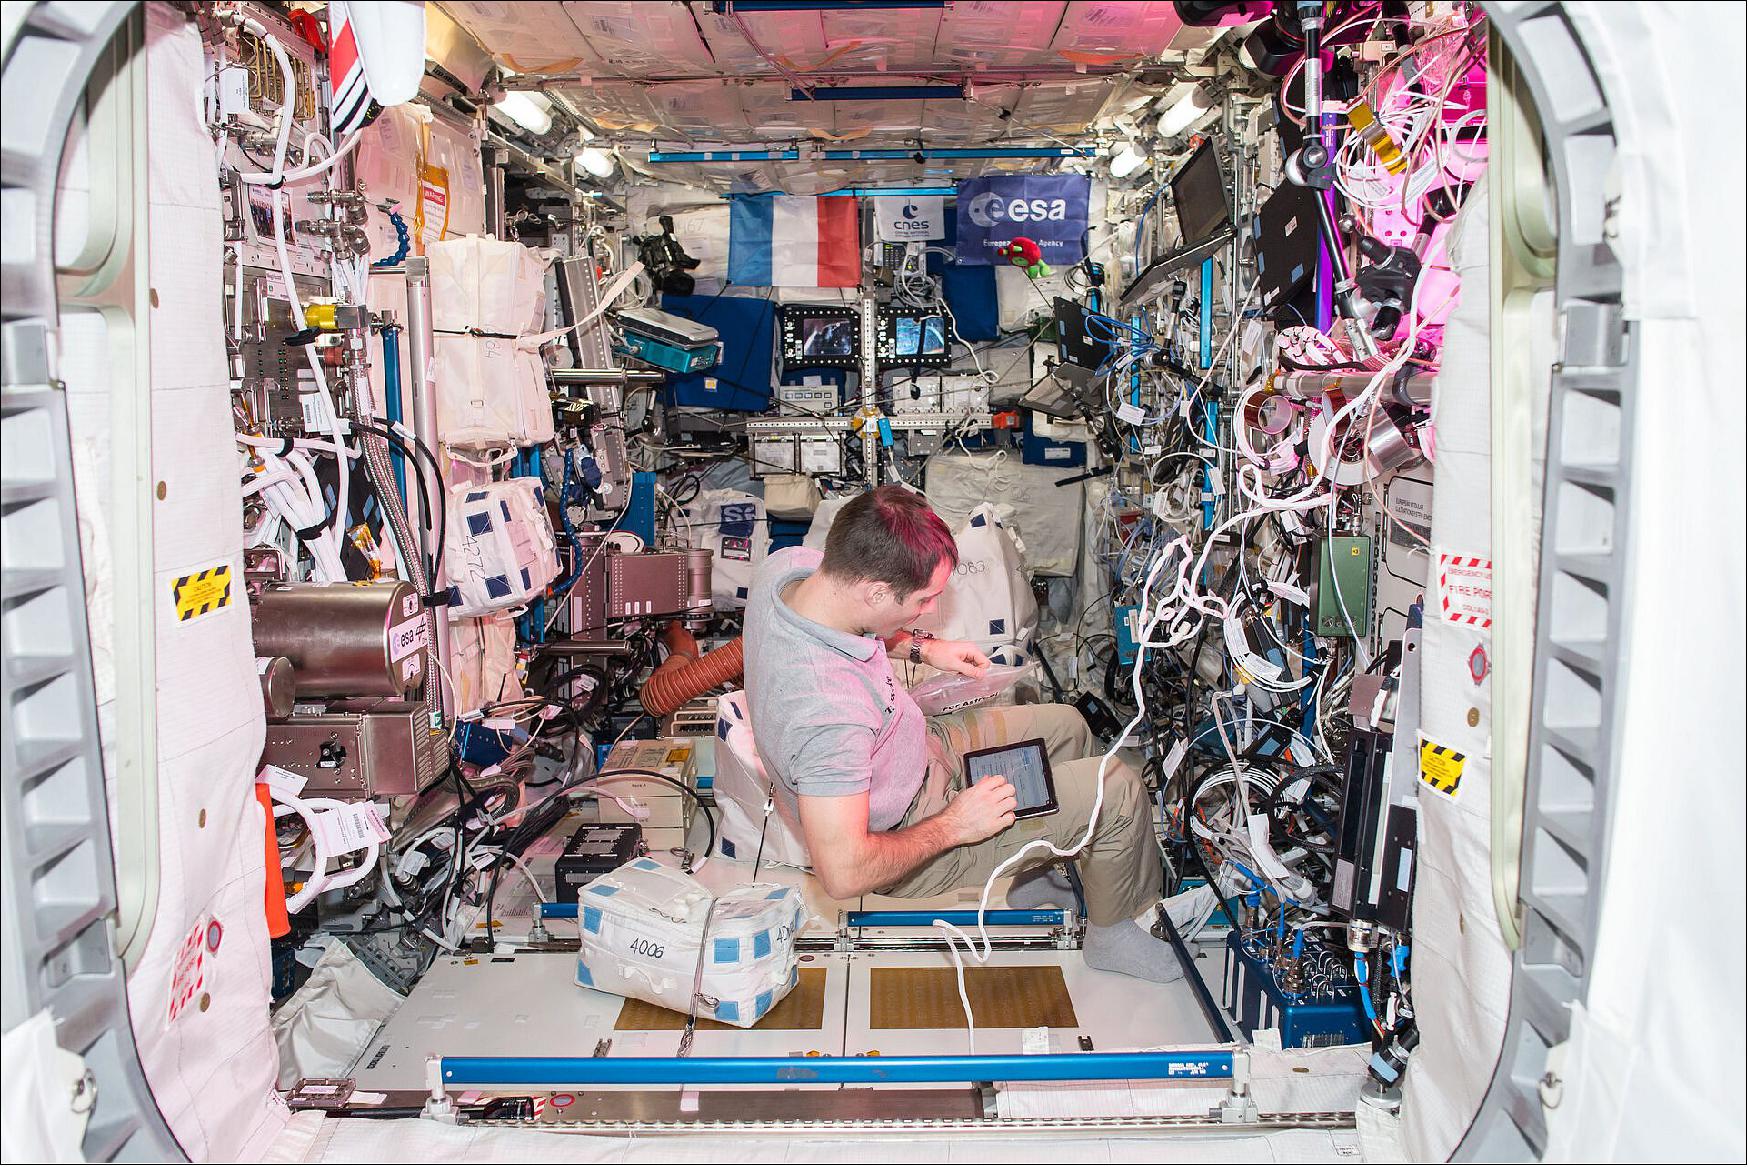 Figure 8: The ESA astronaut of French nationality lived and worked on the Space Station for 196 days during his first mission, Proxima, between November 2016 and June 2017. Thomas is one of 18 European astronauts to have spent time on board and will return for his Alpha mission in spring 2021. - Thomas is seen here working in the European Columbus laboratory that was launched to the Station in February 2008 (image credit: ESA/NASA)